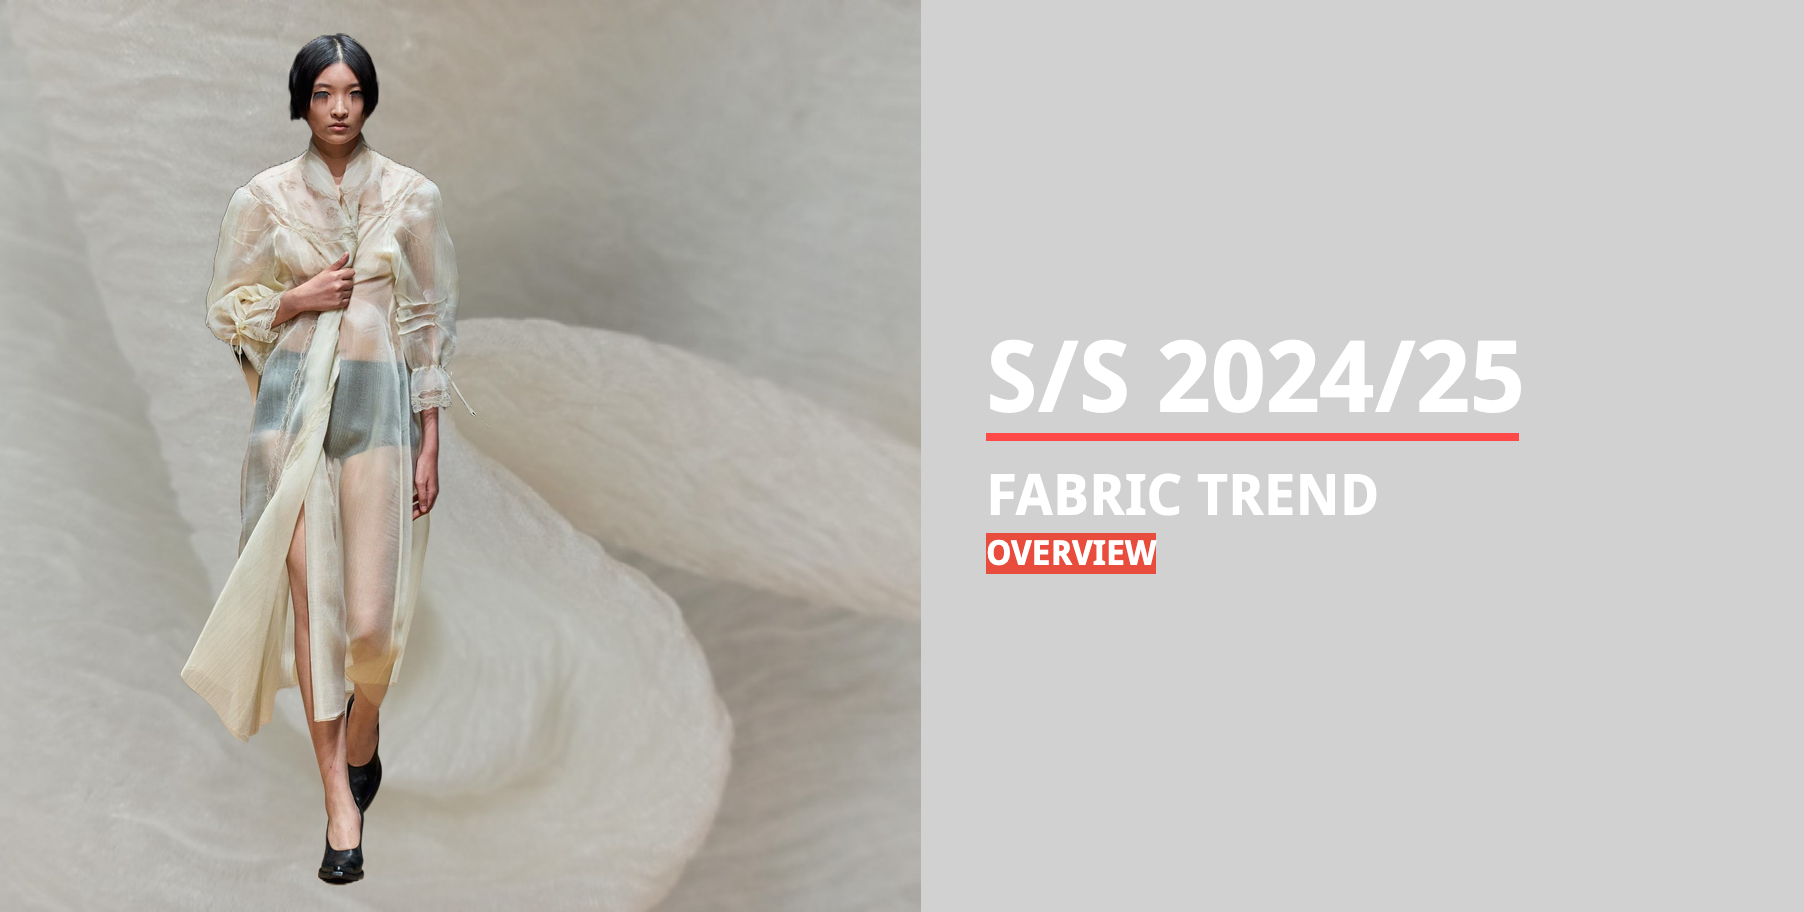 3. "2024 Nail Design Forecast: What's In and What's Out" - wide 4